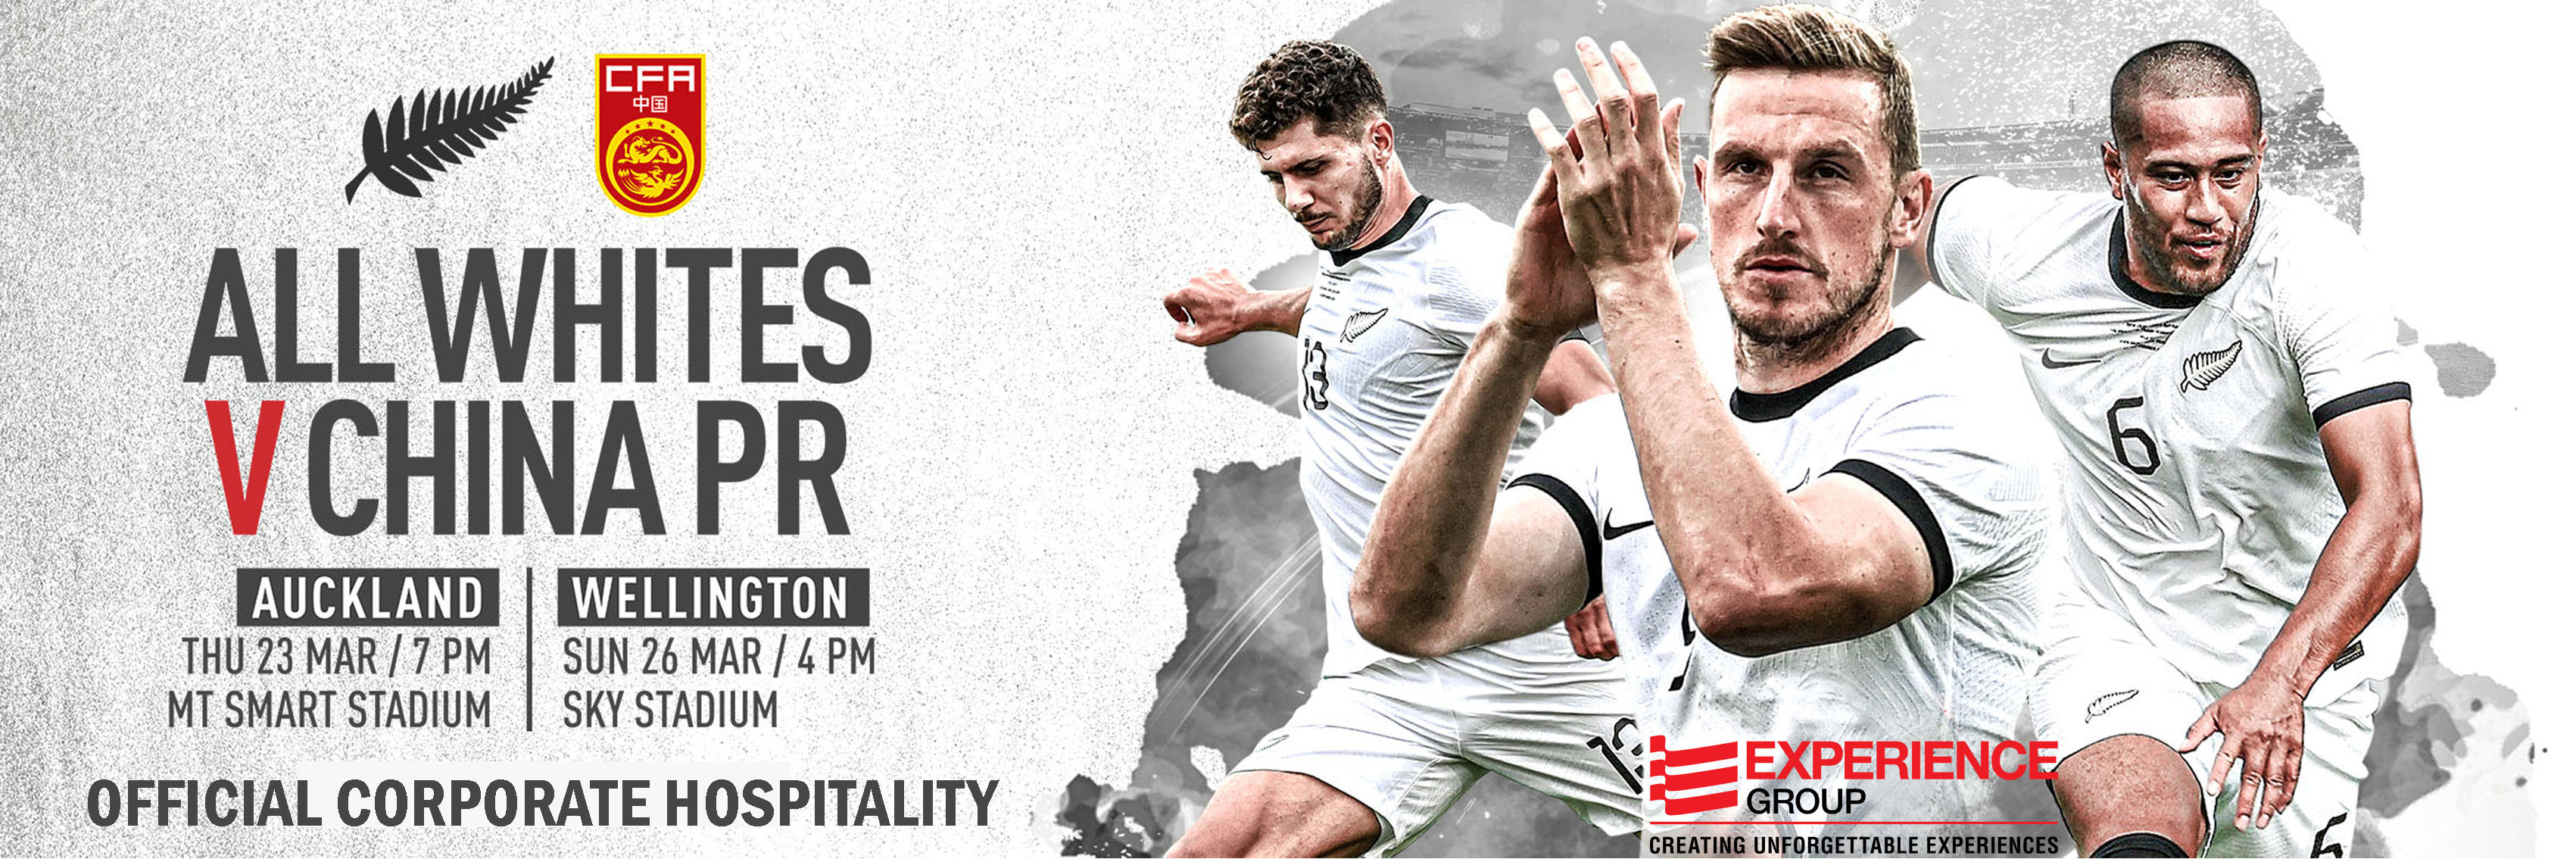 All Whites v China - Experience Group - Official Hospitality Provider